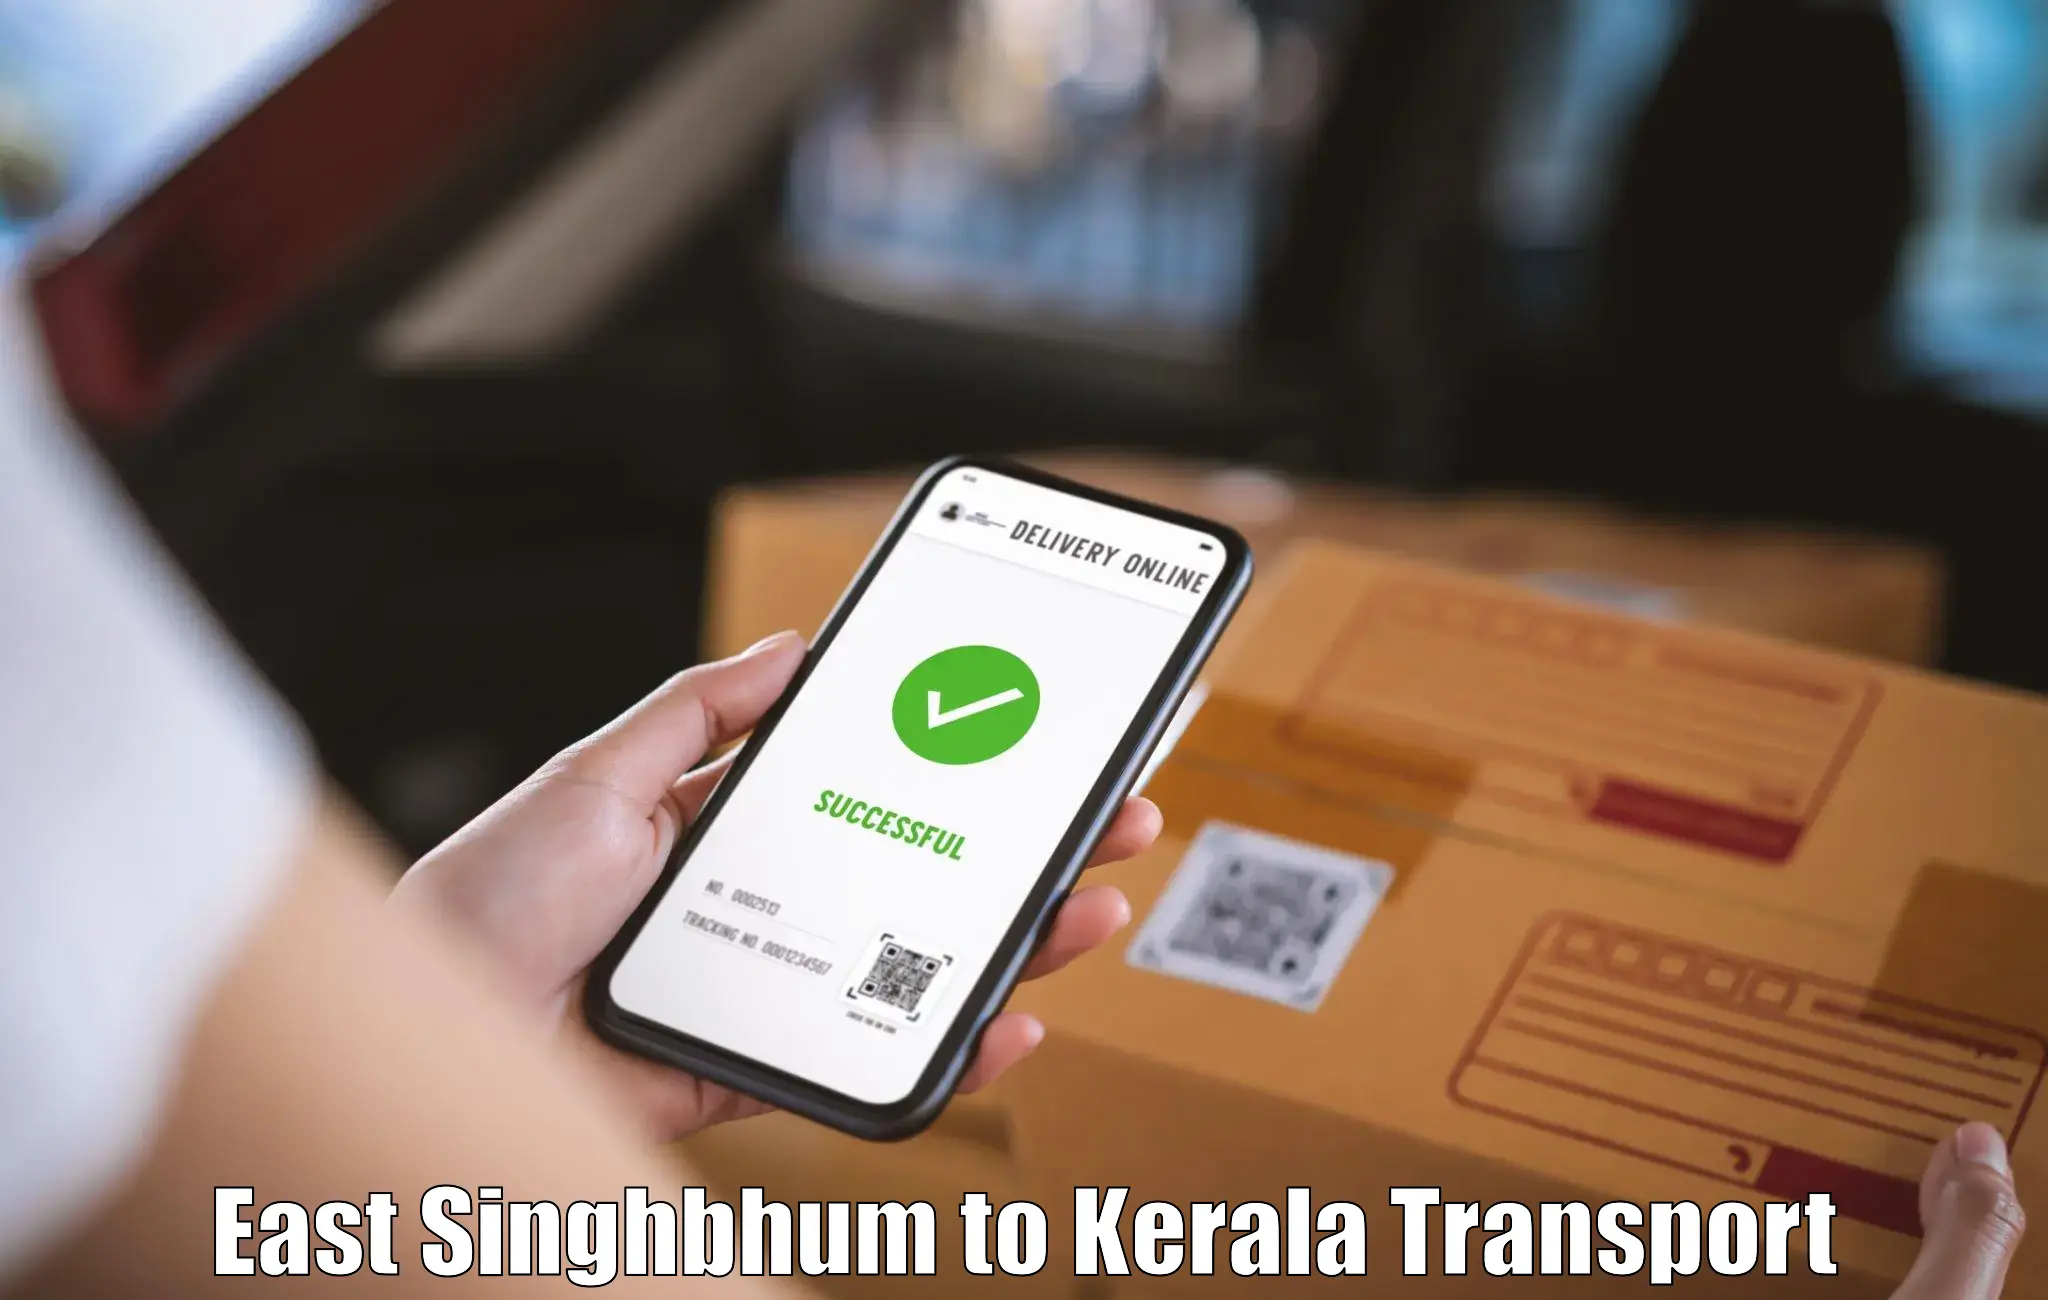 Road transport online services East Singhbhum to Pathanamthitta